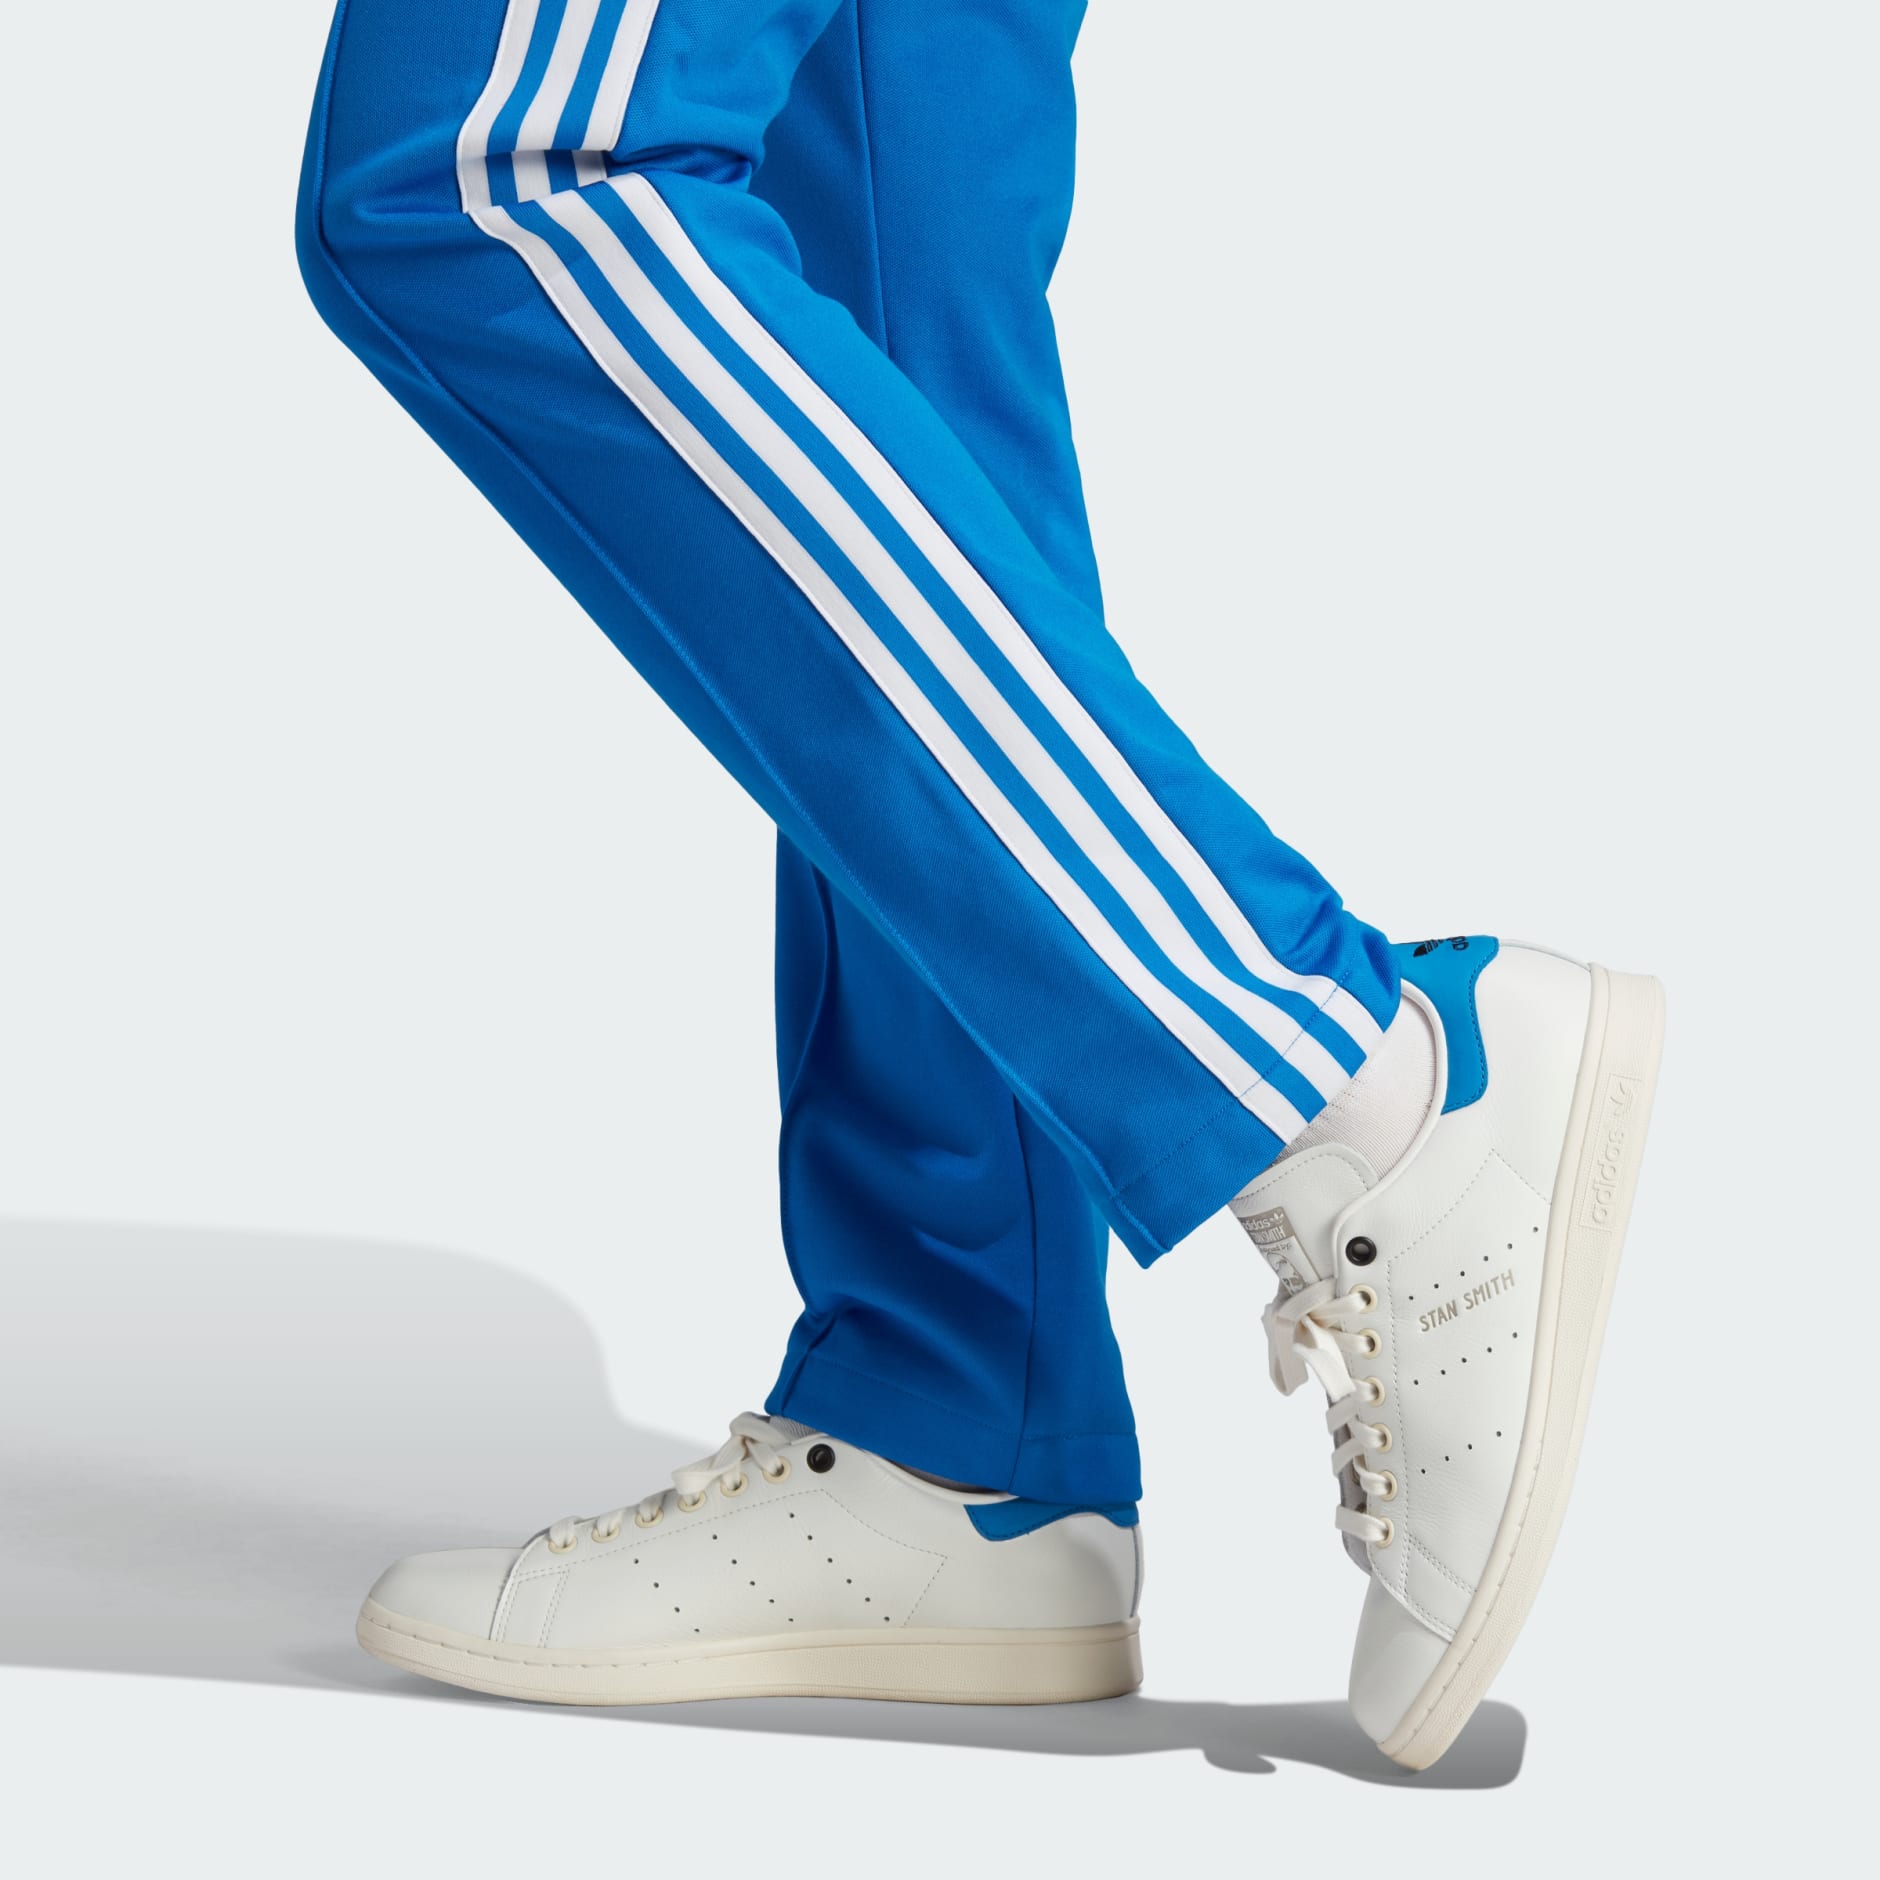 Buy Blue Track Pants for Men by FITZ Online | Ajio.com